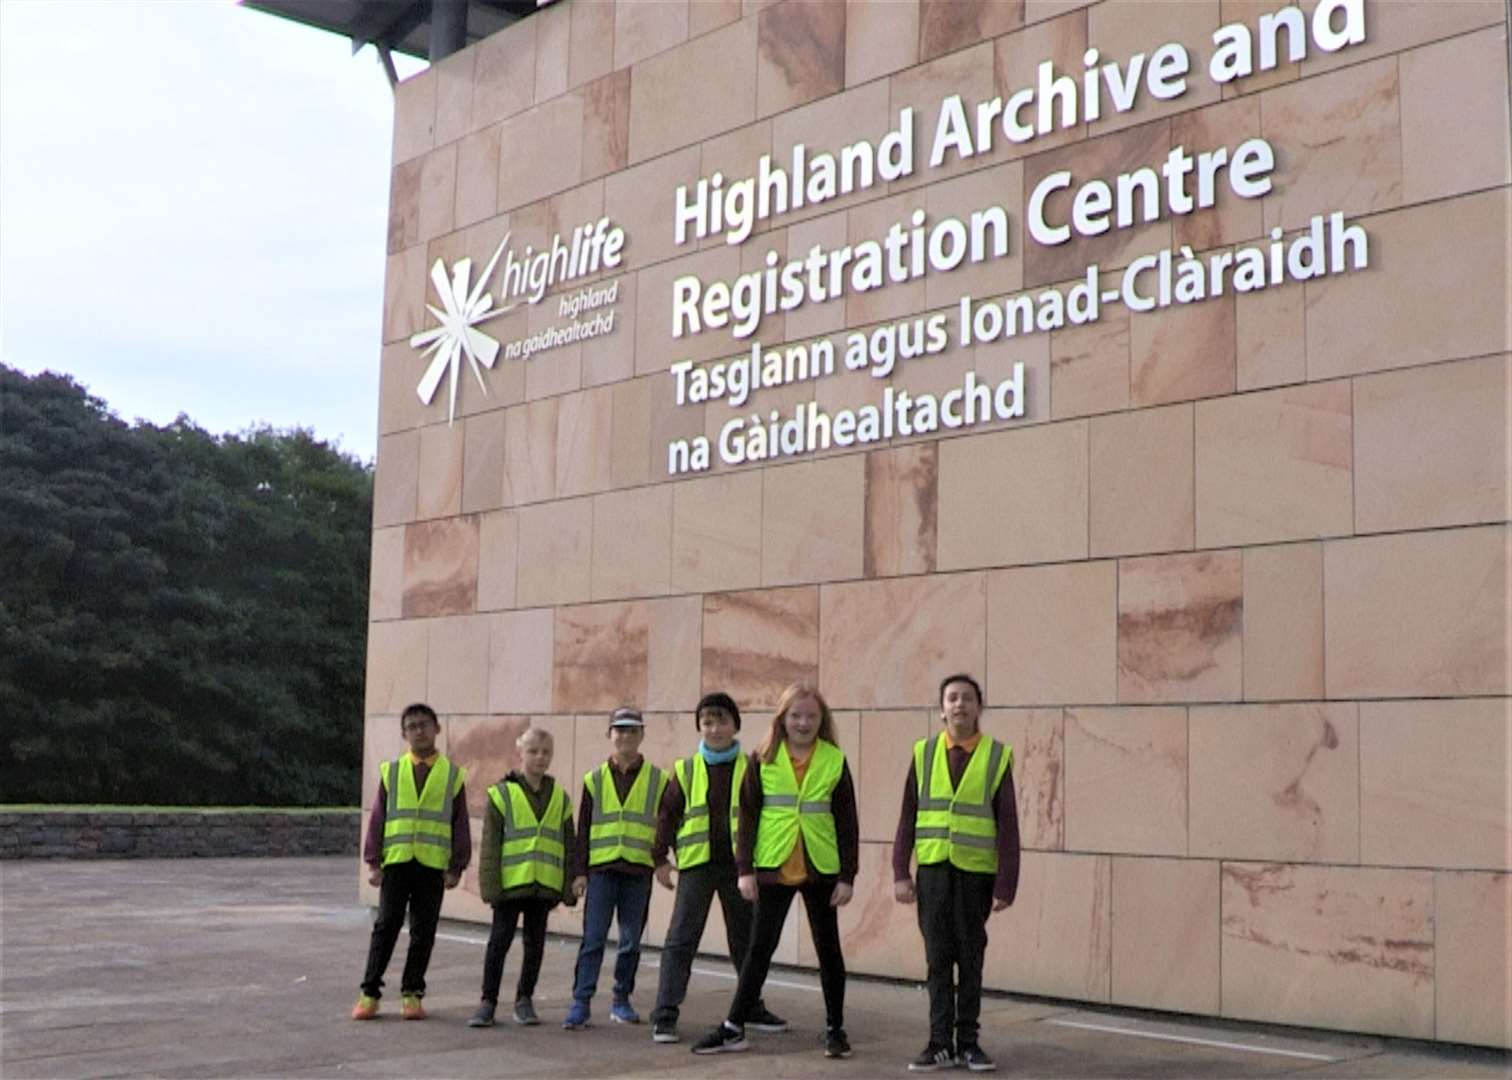 Pupils from Central Primary School outside the Highland Archive Centre.